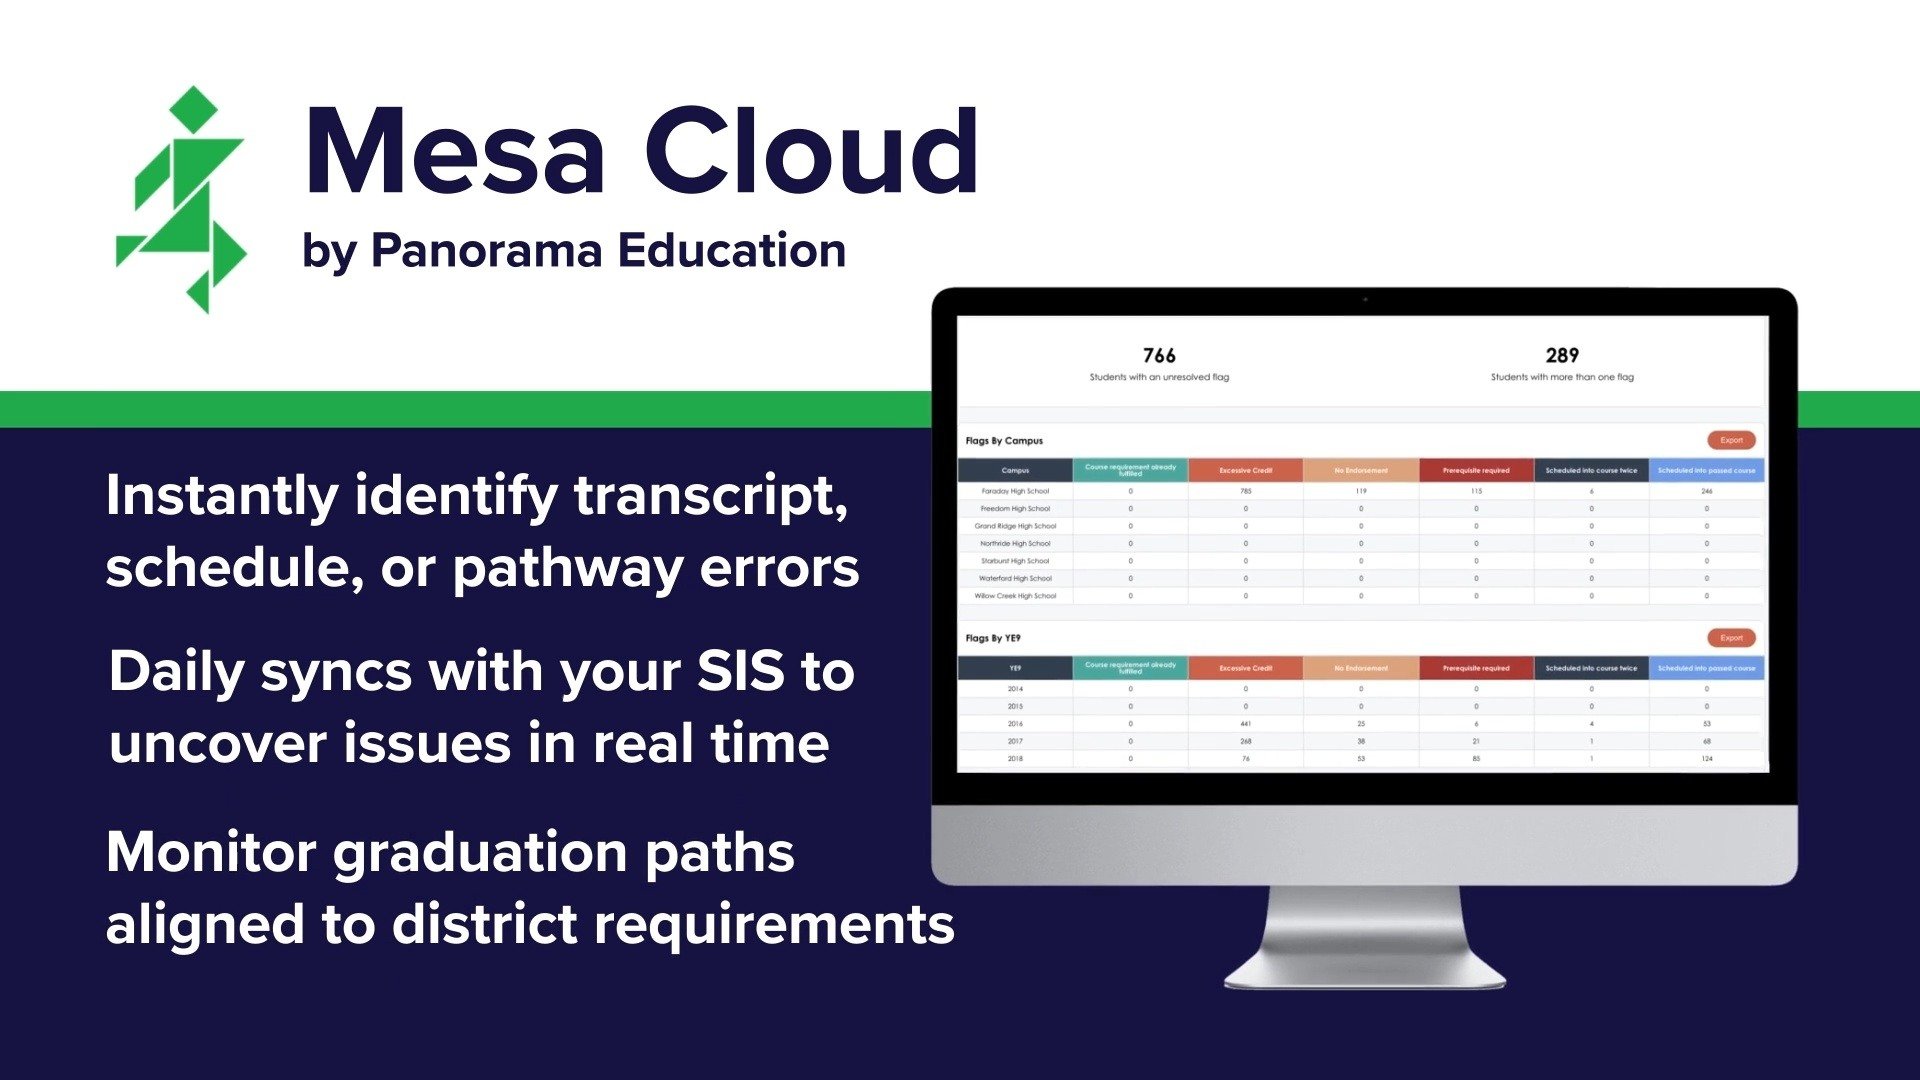 Introduction to Mesa Cloud by Panorama